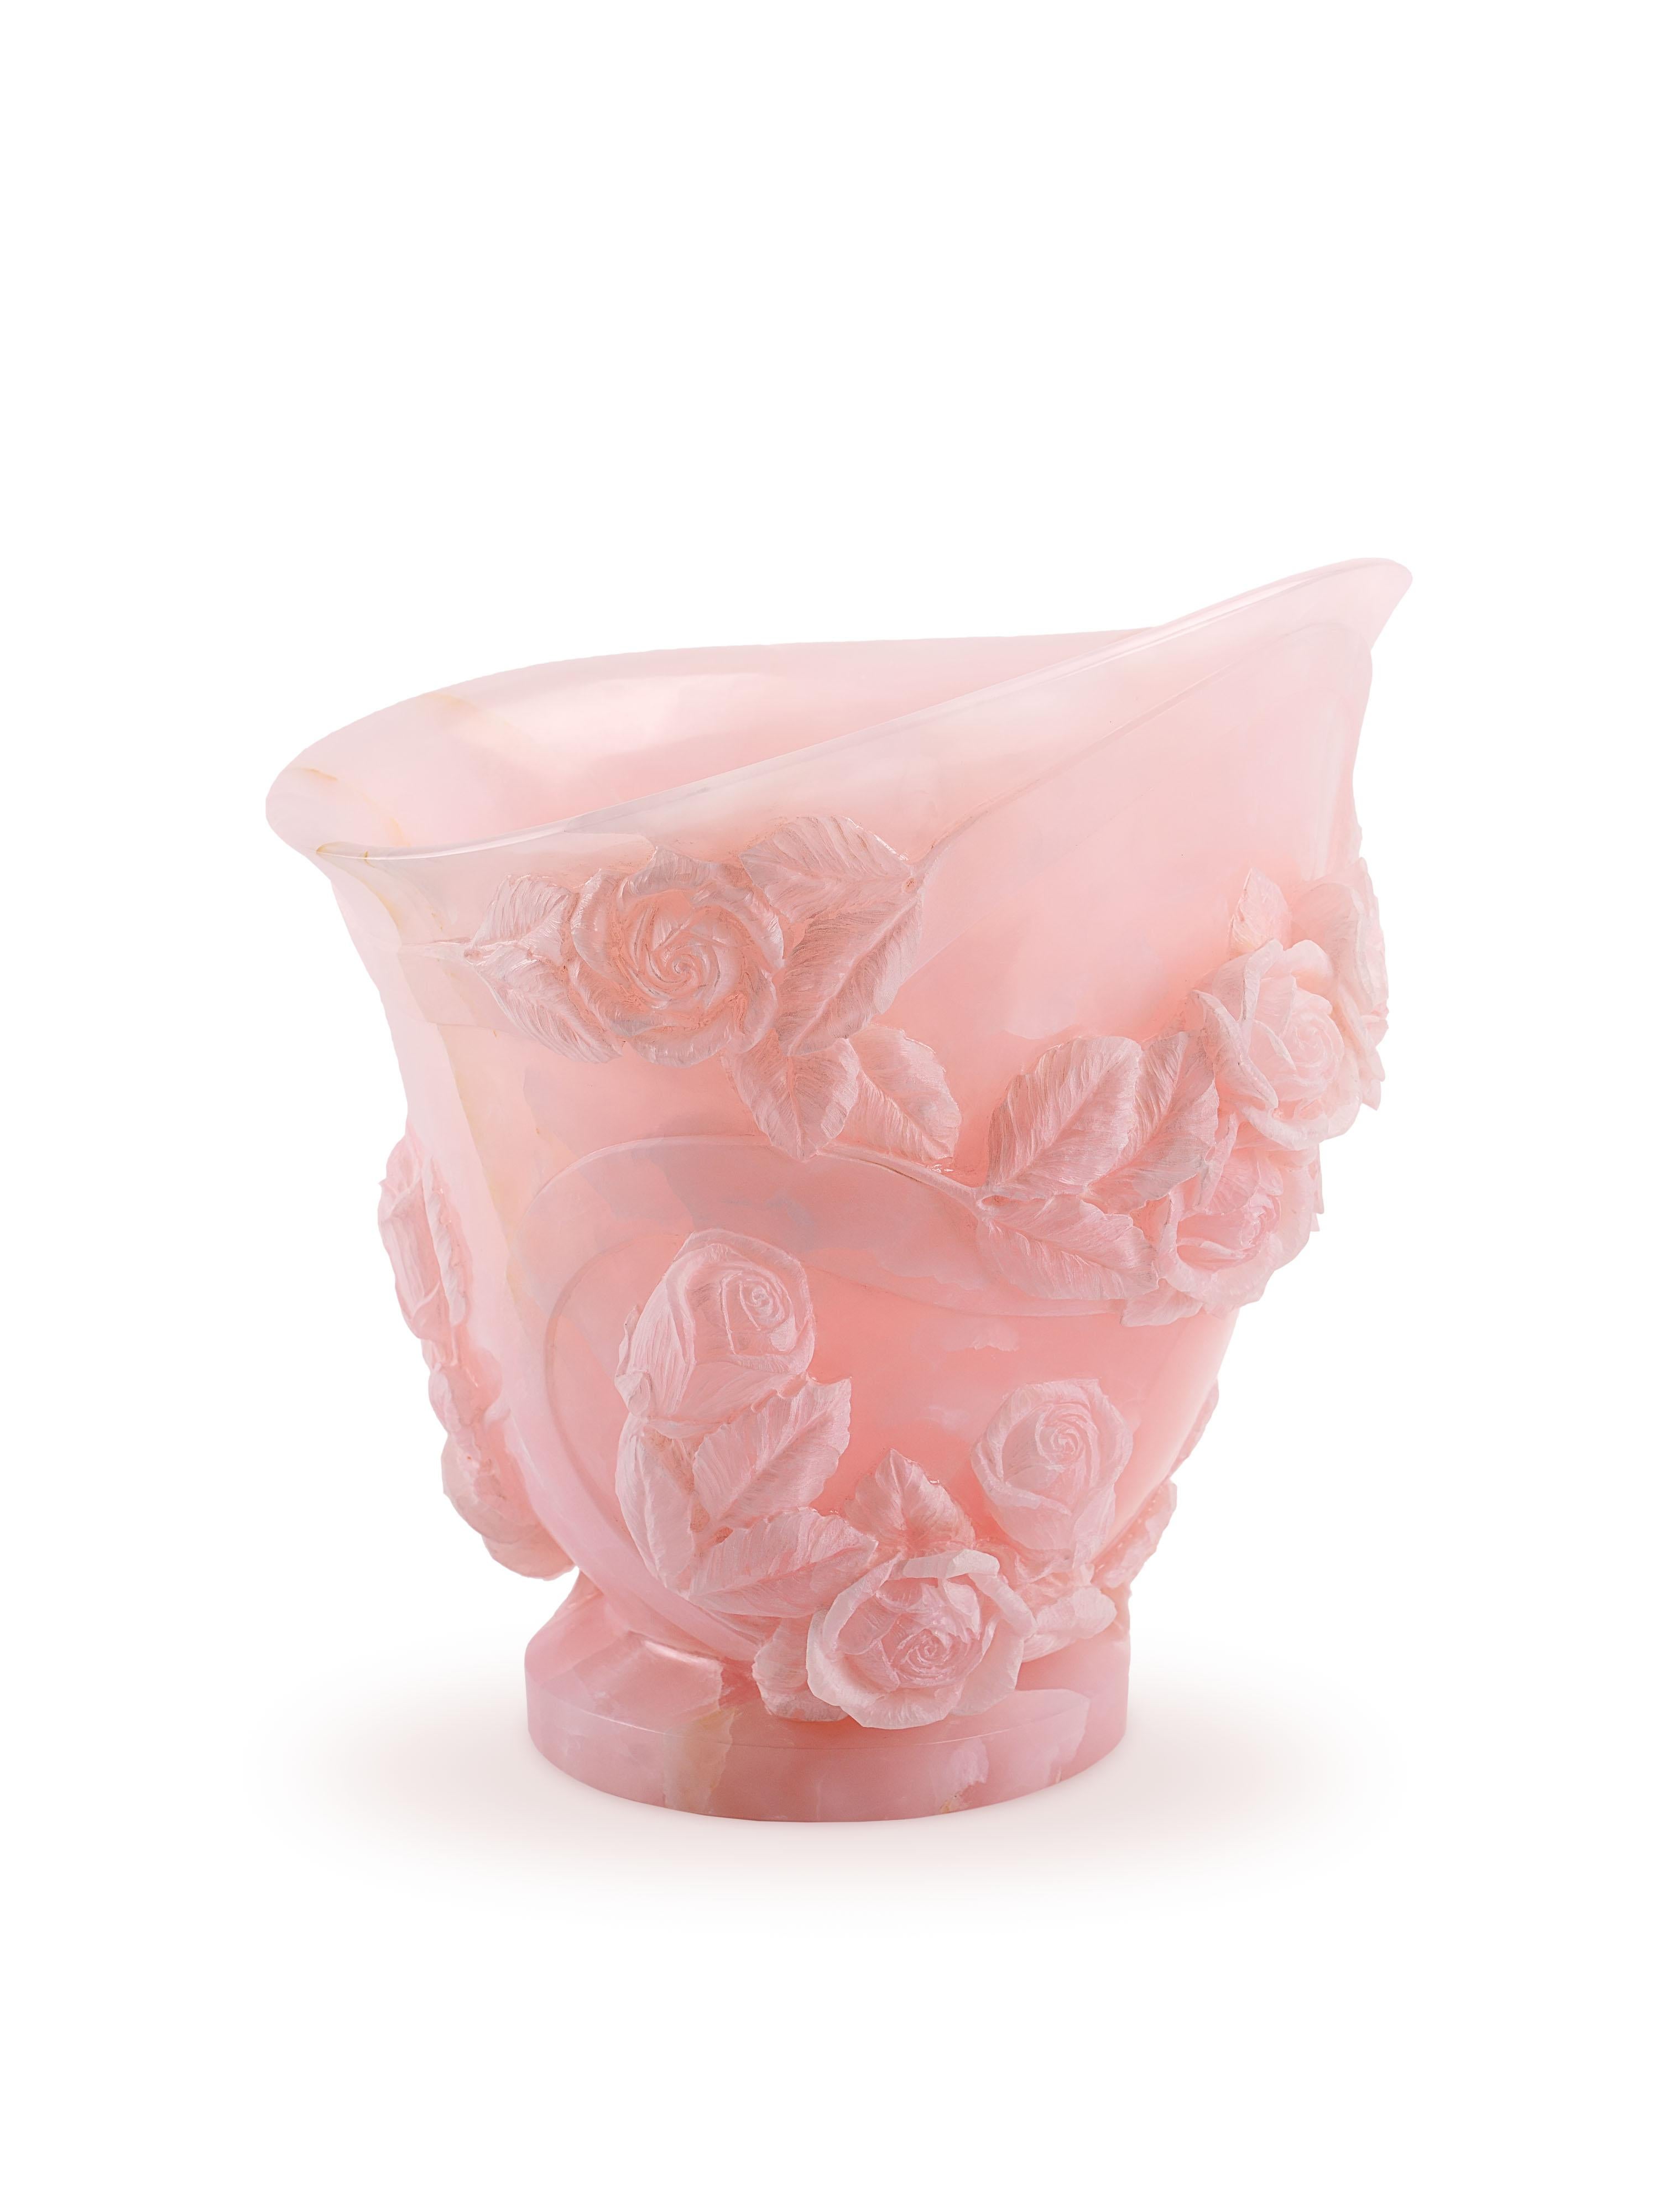 Hand-Carved Rose Sculpture Vase 13 Roses Hand Carved Italy Pink Onyx Block Limited Edition For Sale